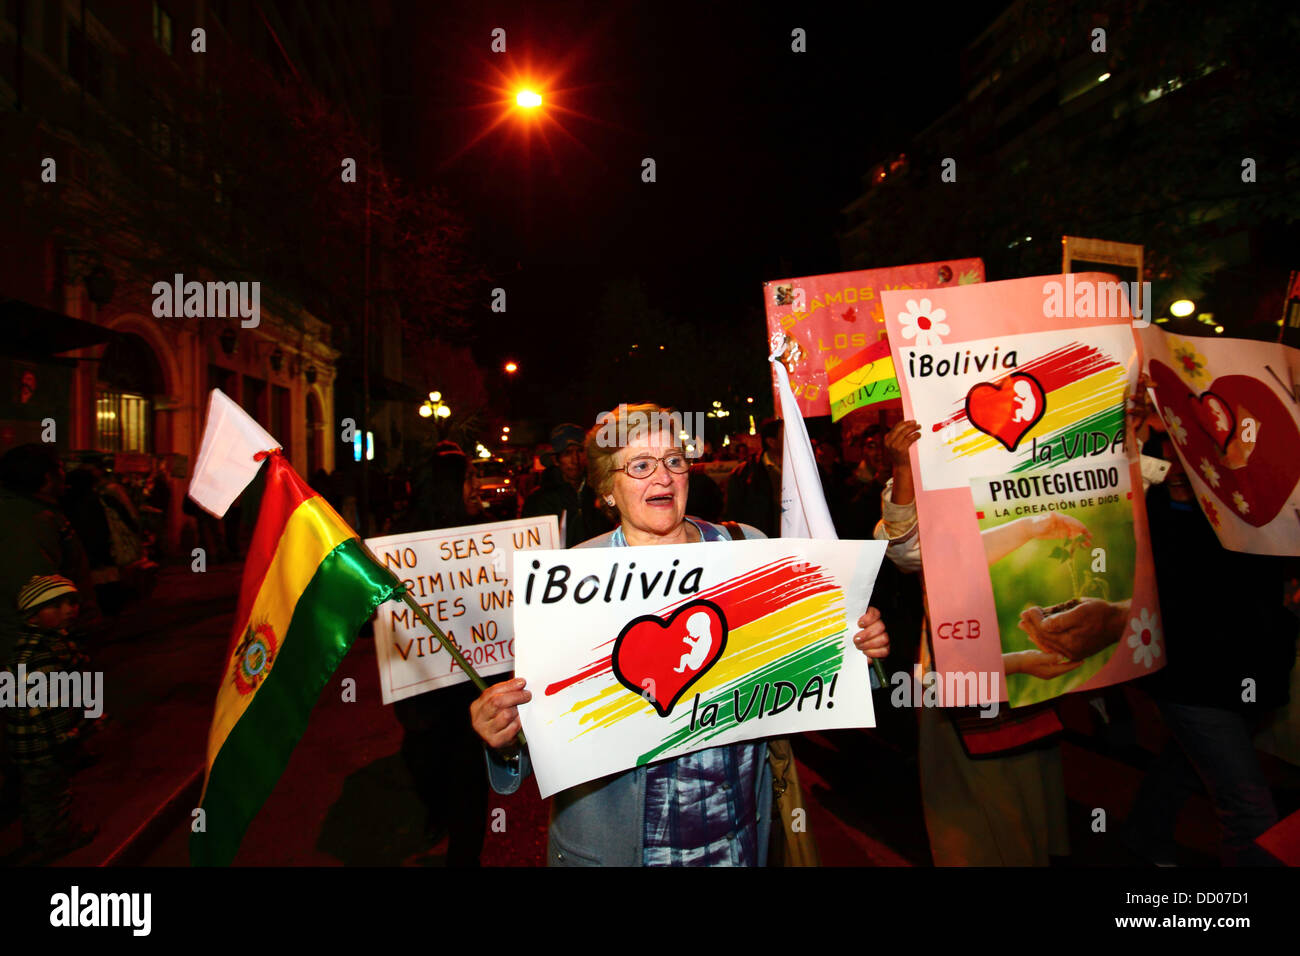 LA PAZ, BOLIVIA, 22nd August 2013. People take part in a march organised by the Red Pro-Vida (Pro Life Network) to protest against decriminalising abortion. Bolivia has been debating whether to decriminalise abortion since March 2012. Credit: James Brunker / Alamy Live News Stock Photo